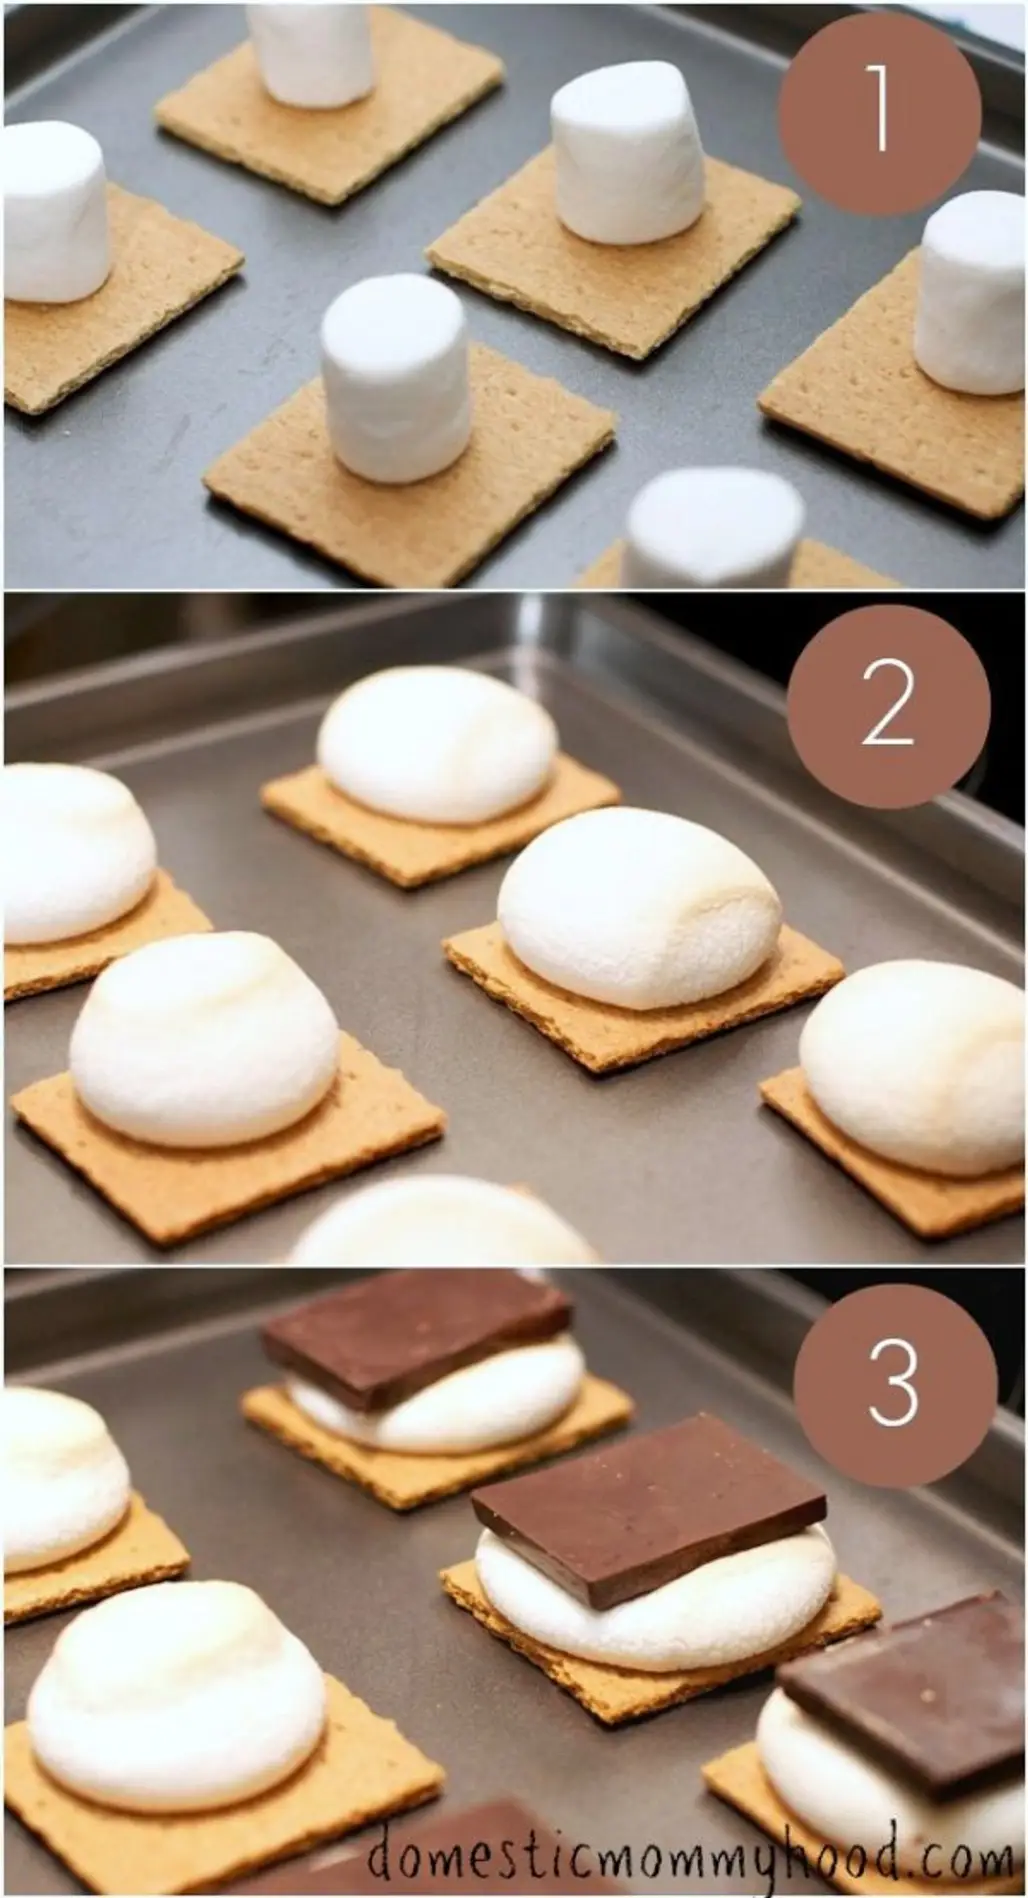 How to Make S’mores in the Oven